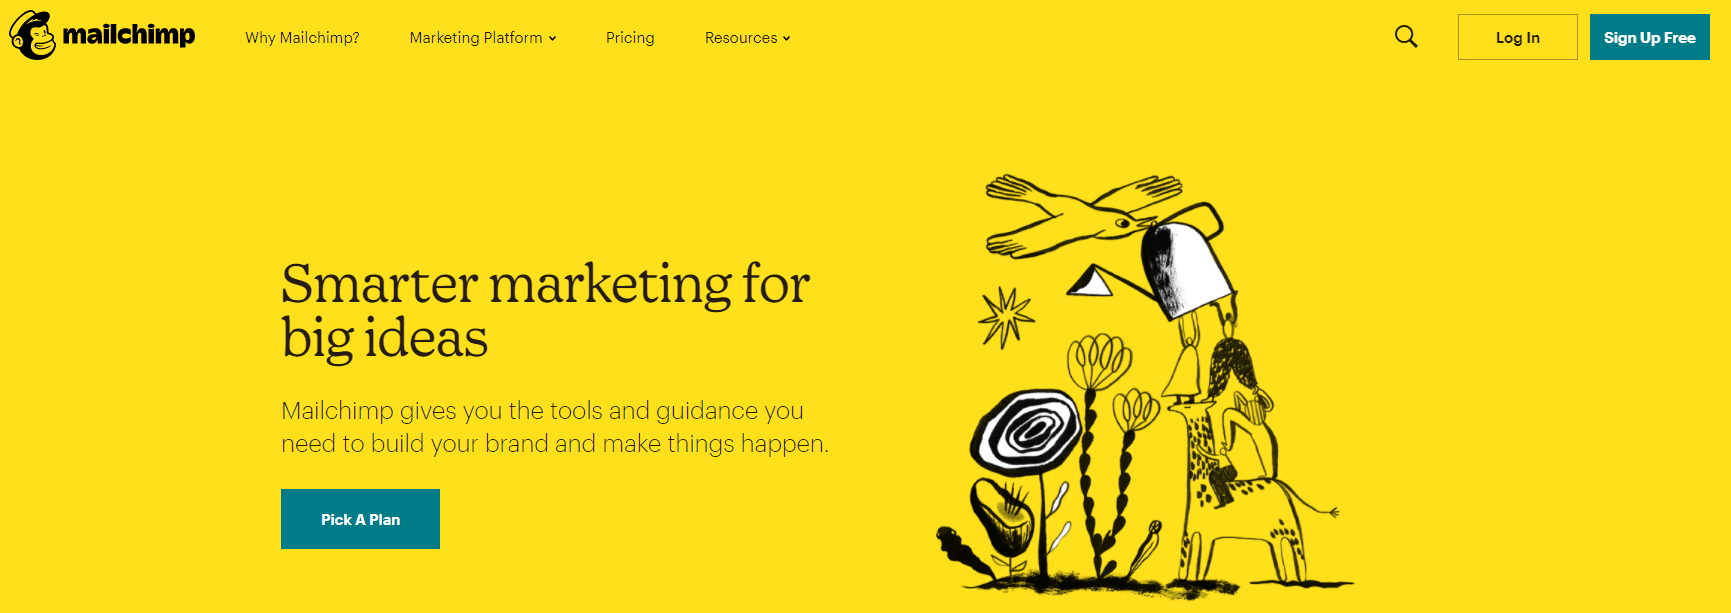 The Mailchimp homepage.